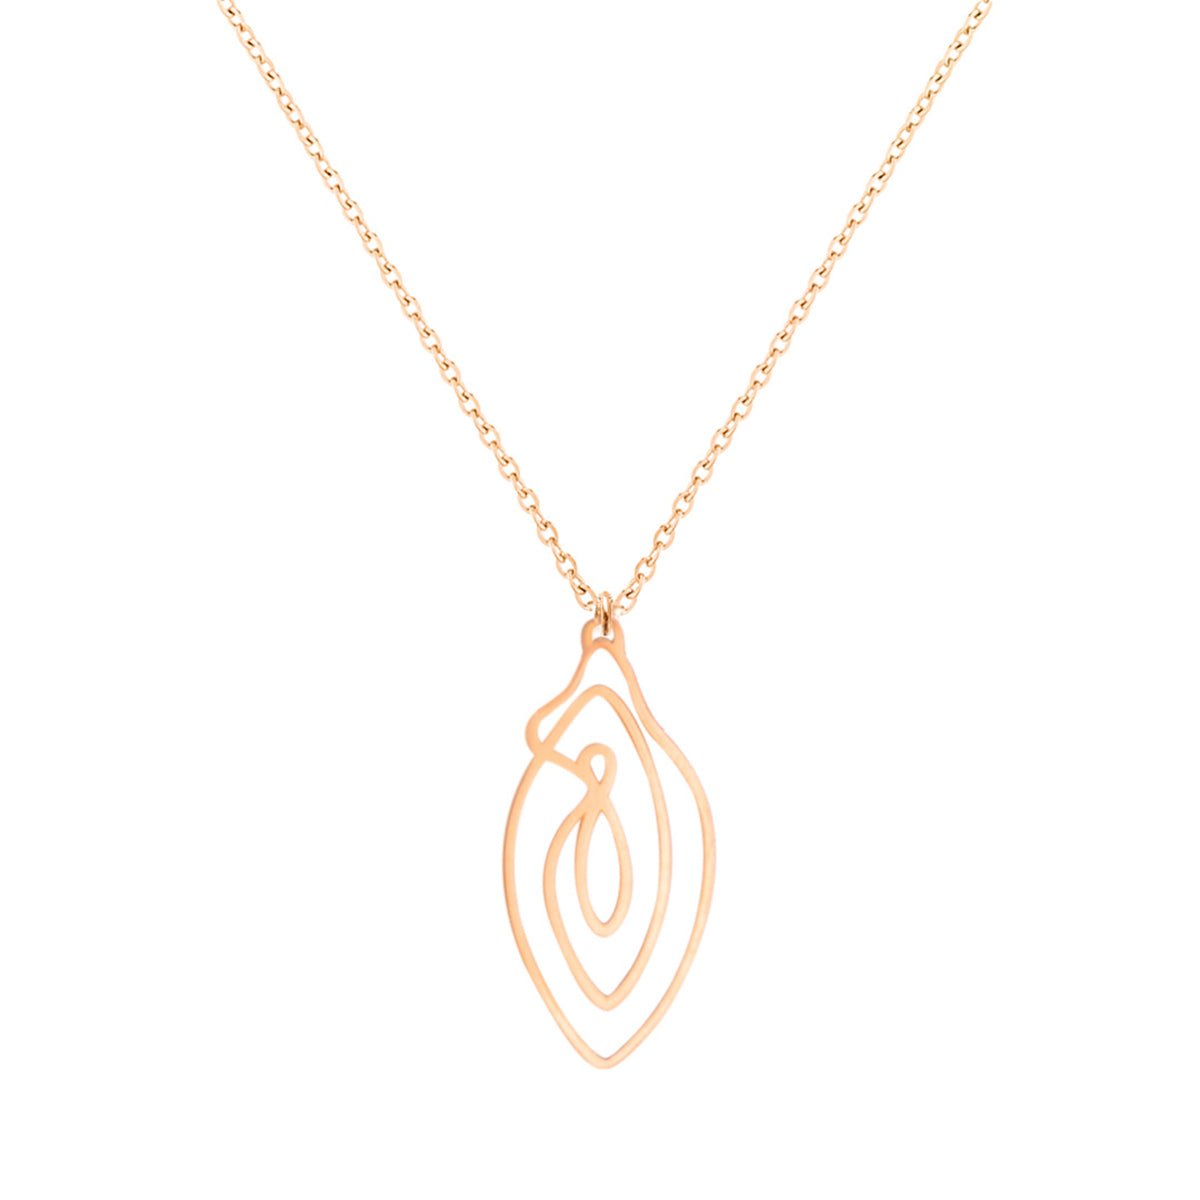 Vulvii Necklace - Rose Gold Necklaces